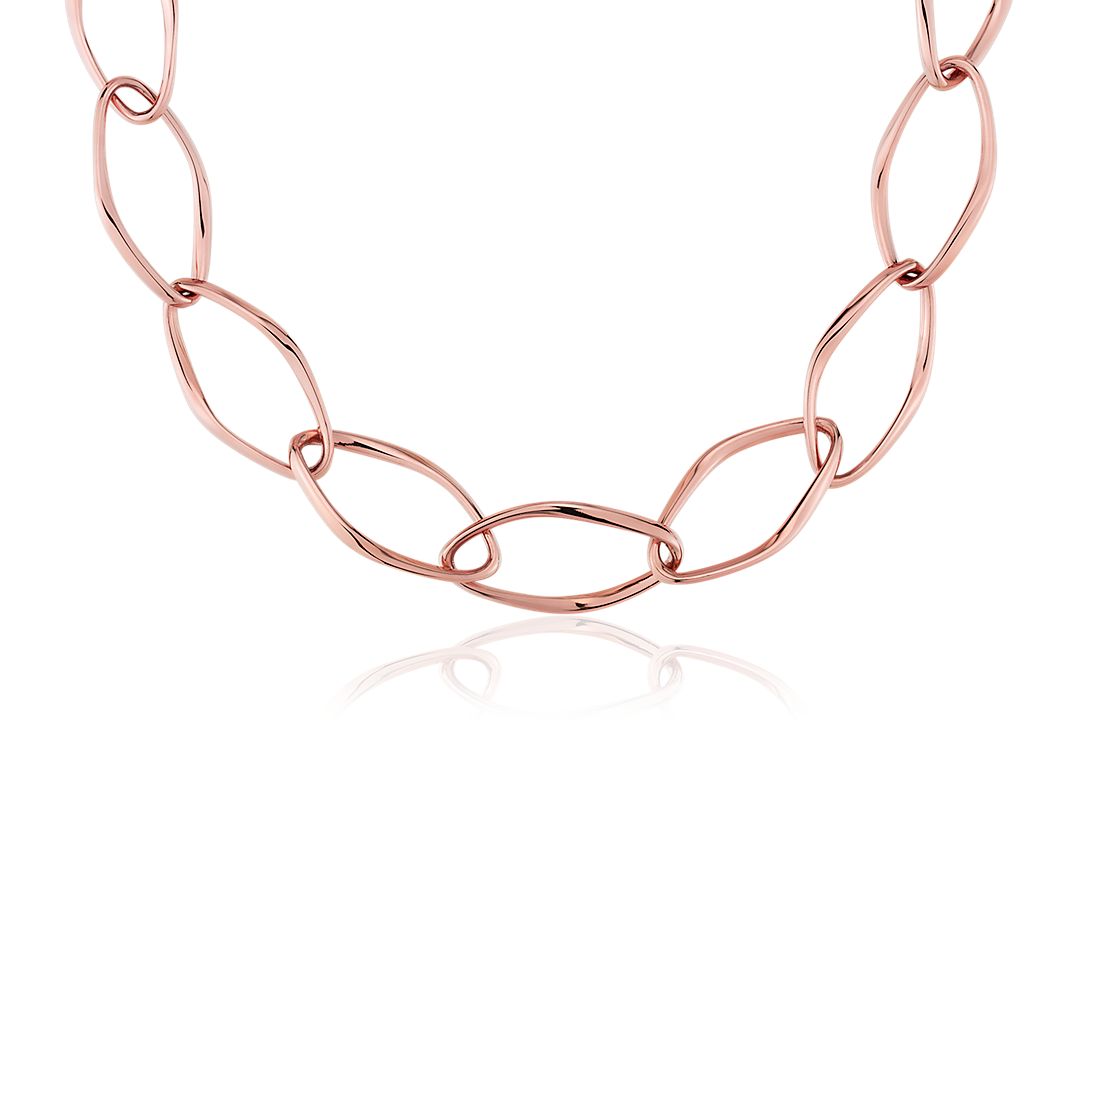 Open Oval Chain Necklace in 18k Italian Rose Gold